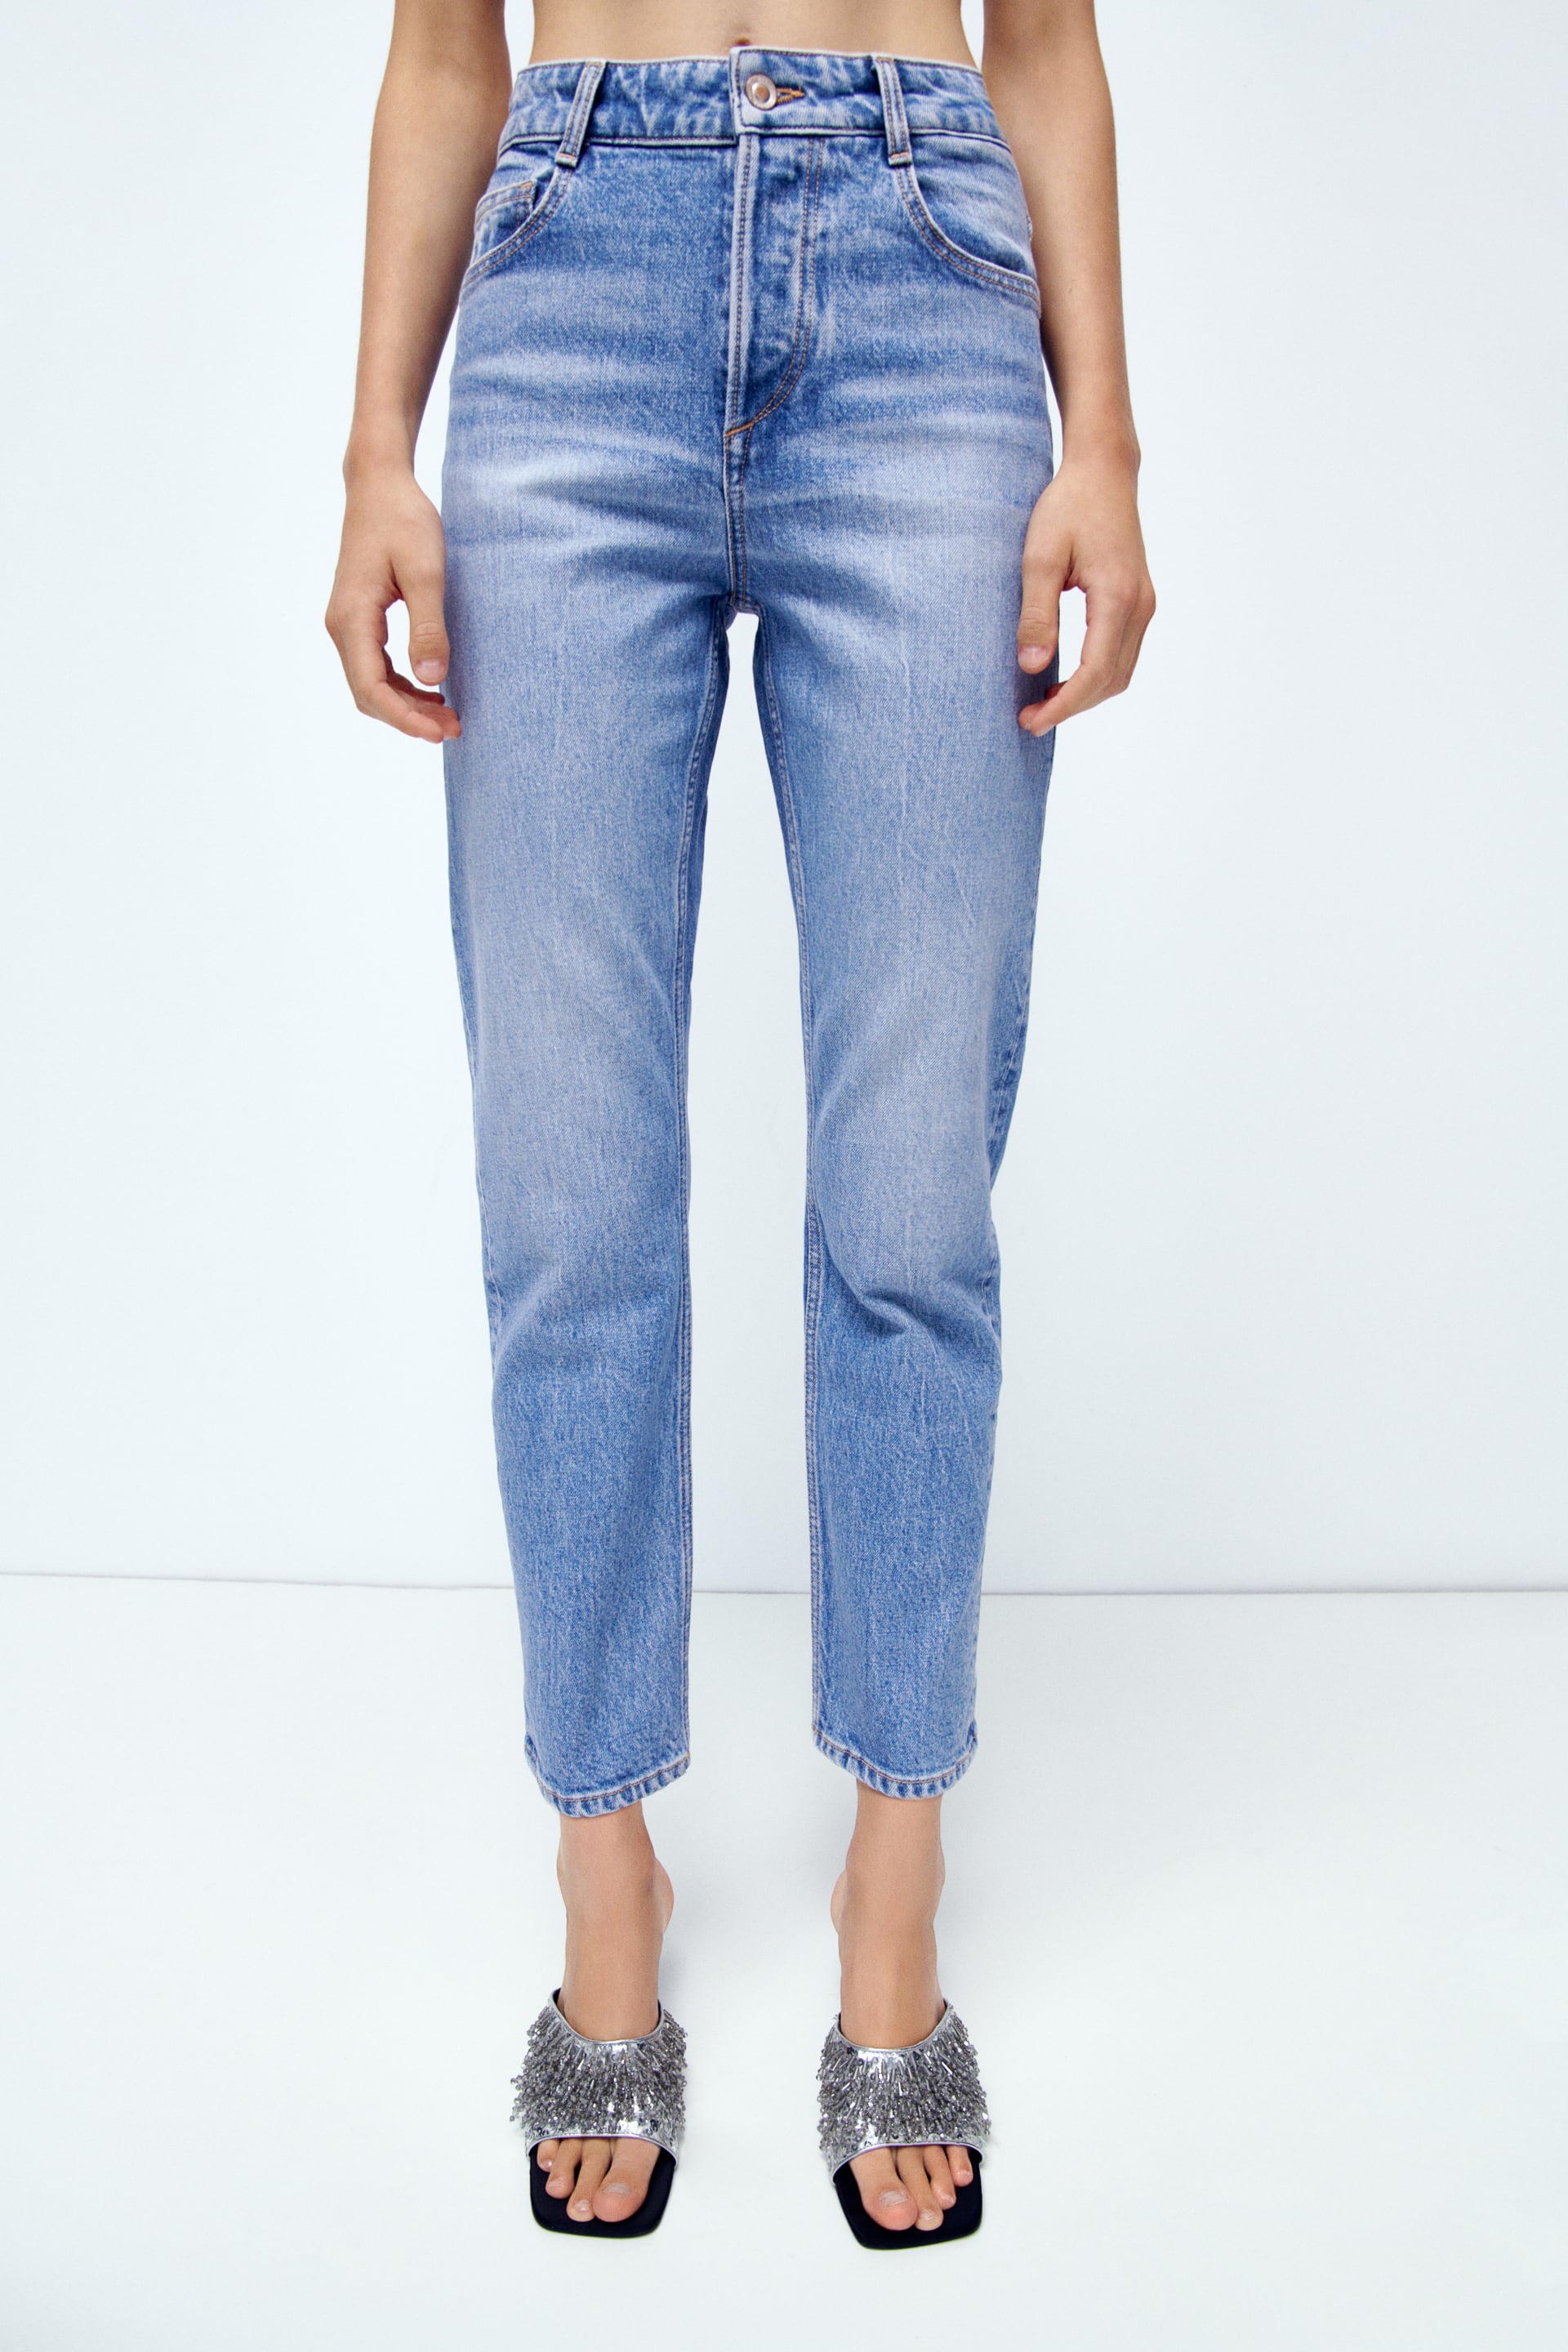 ZARA RIPPED MOM FIT JEANS HI-RISE ANKLE LENGHT – Amarella